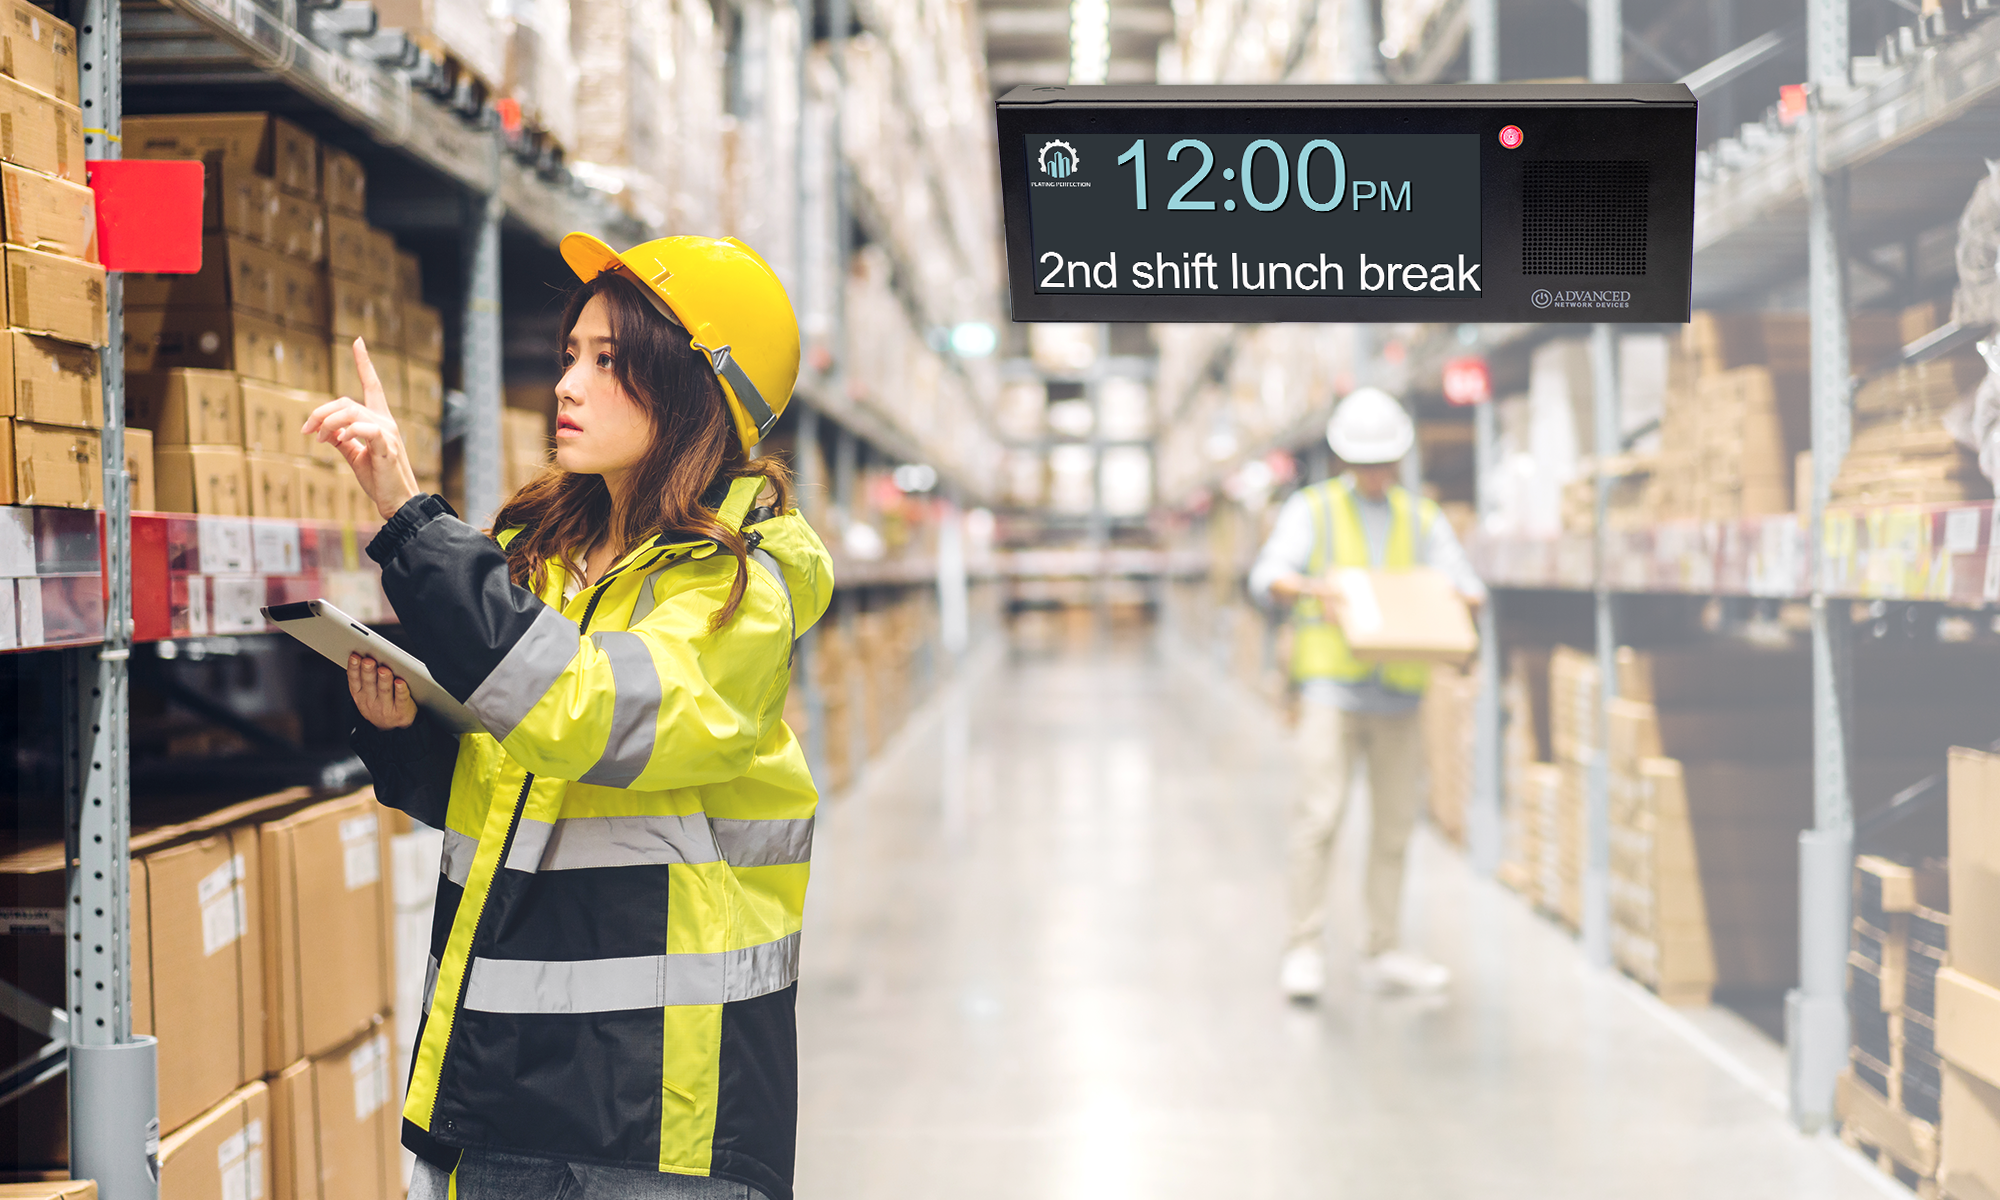 scheduling-reminder-on-hd-ip-display-in-industrial-facility